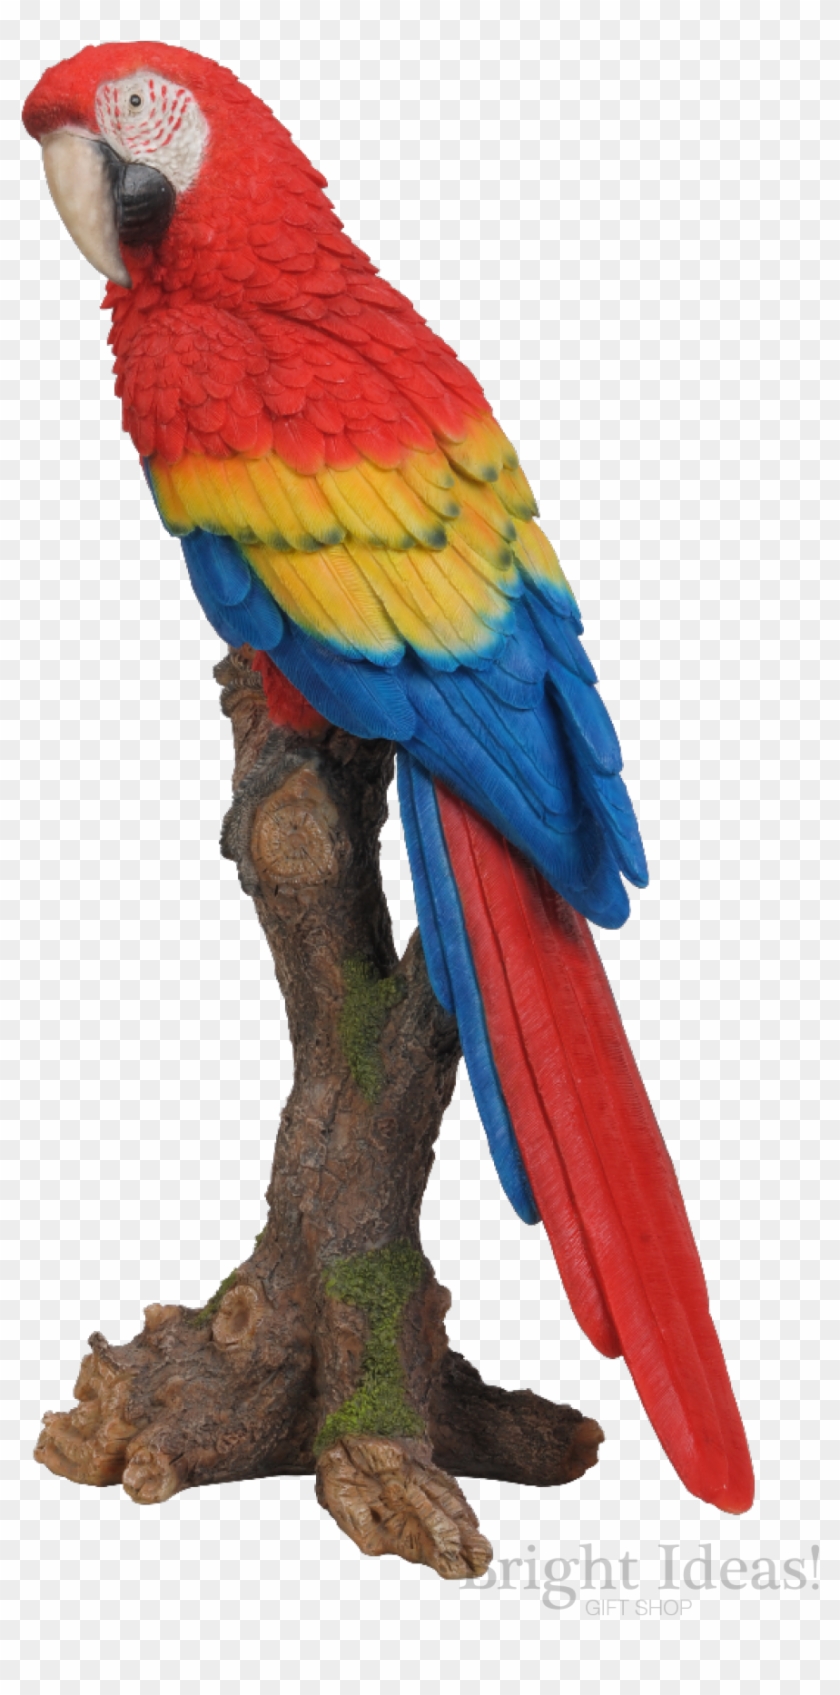 Red Macaw Exotic Bird Vivid Arts Real Life - Red Macaw Exotic Bird Vivid Arts Real Life #1689427